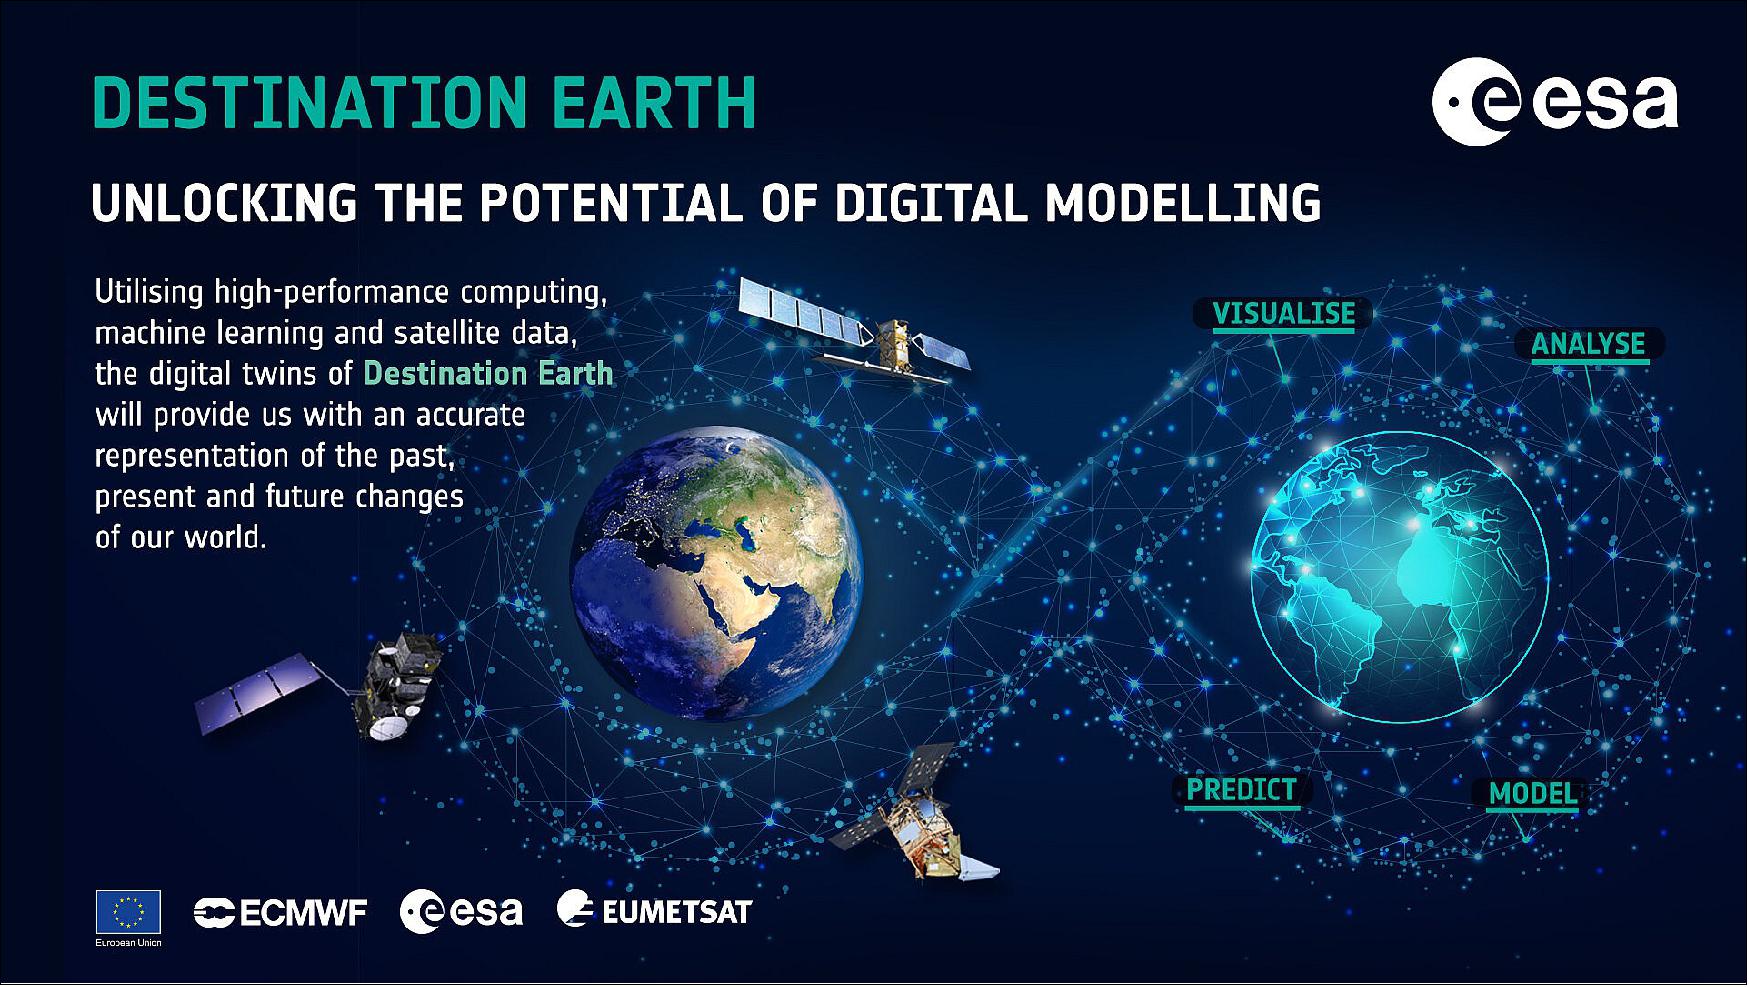 Figure 2: A digital twin is, in essence, a virtual representation that serves as a real-time digital counterpart of a physical object. Destination Earth’s digital twins are digital replicas of our planet’s complex Earth system. They will be built under thematic categorisations from the different domains of Earth science, such as extreme natural disasters, climate change adaptation, oceans and biodiversity. The aim is to integrate these digital replicas to form one comprehensive digital twin of the complete Earth system (image credit: ESA)